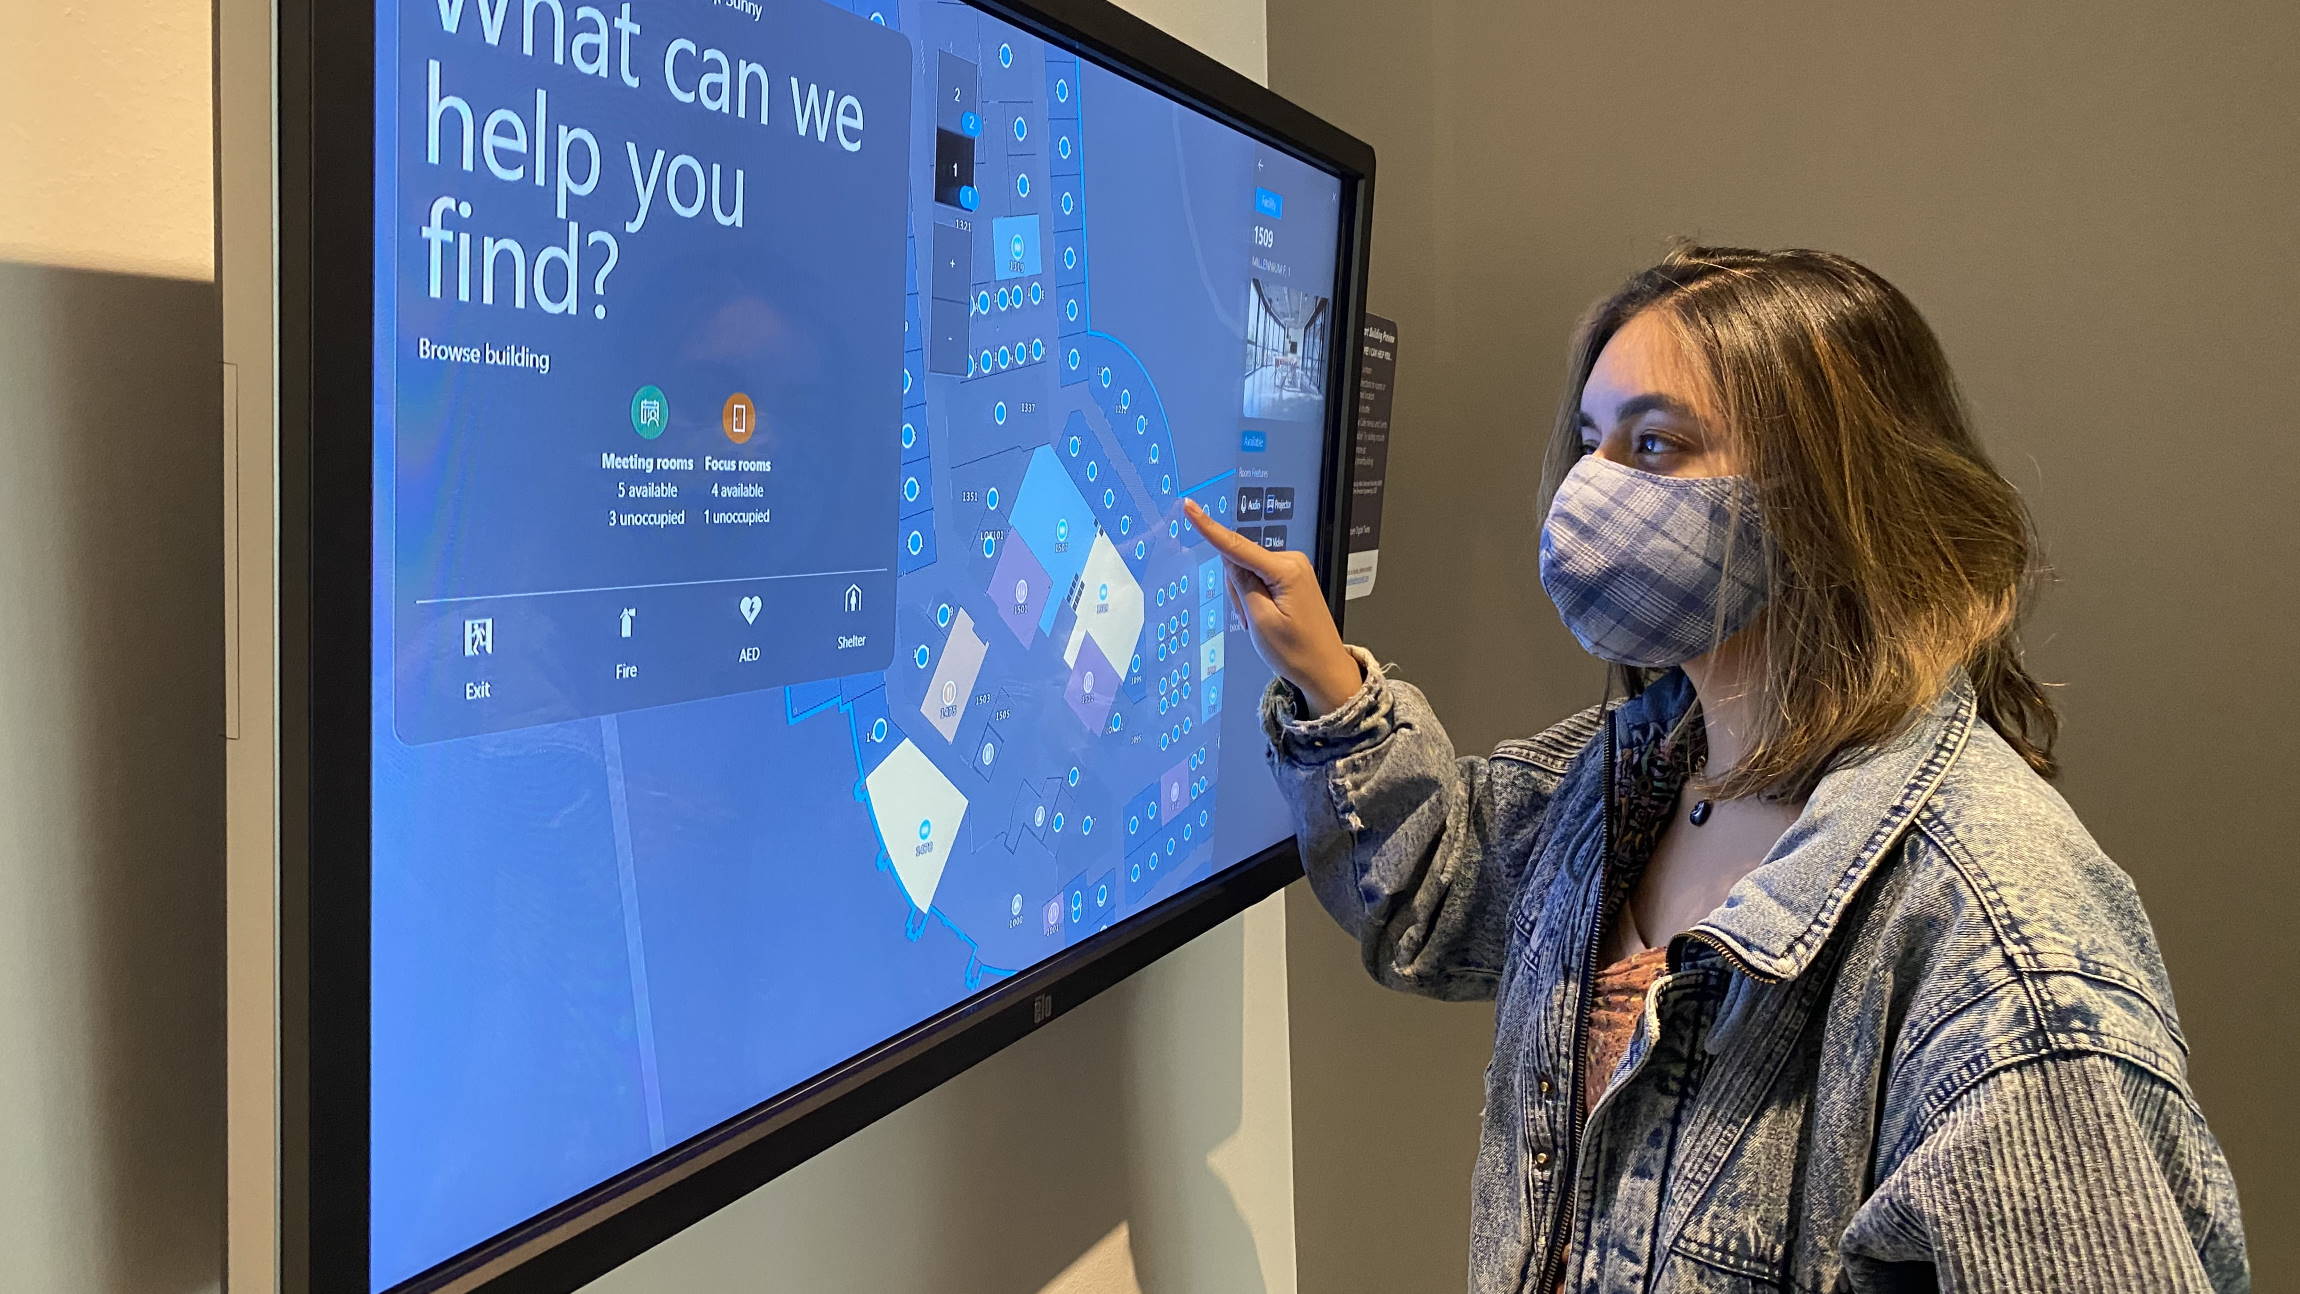 Ansari interacts with the screen of a SmartBuilding services kiosk in the lobby of a Microsoft building.